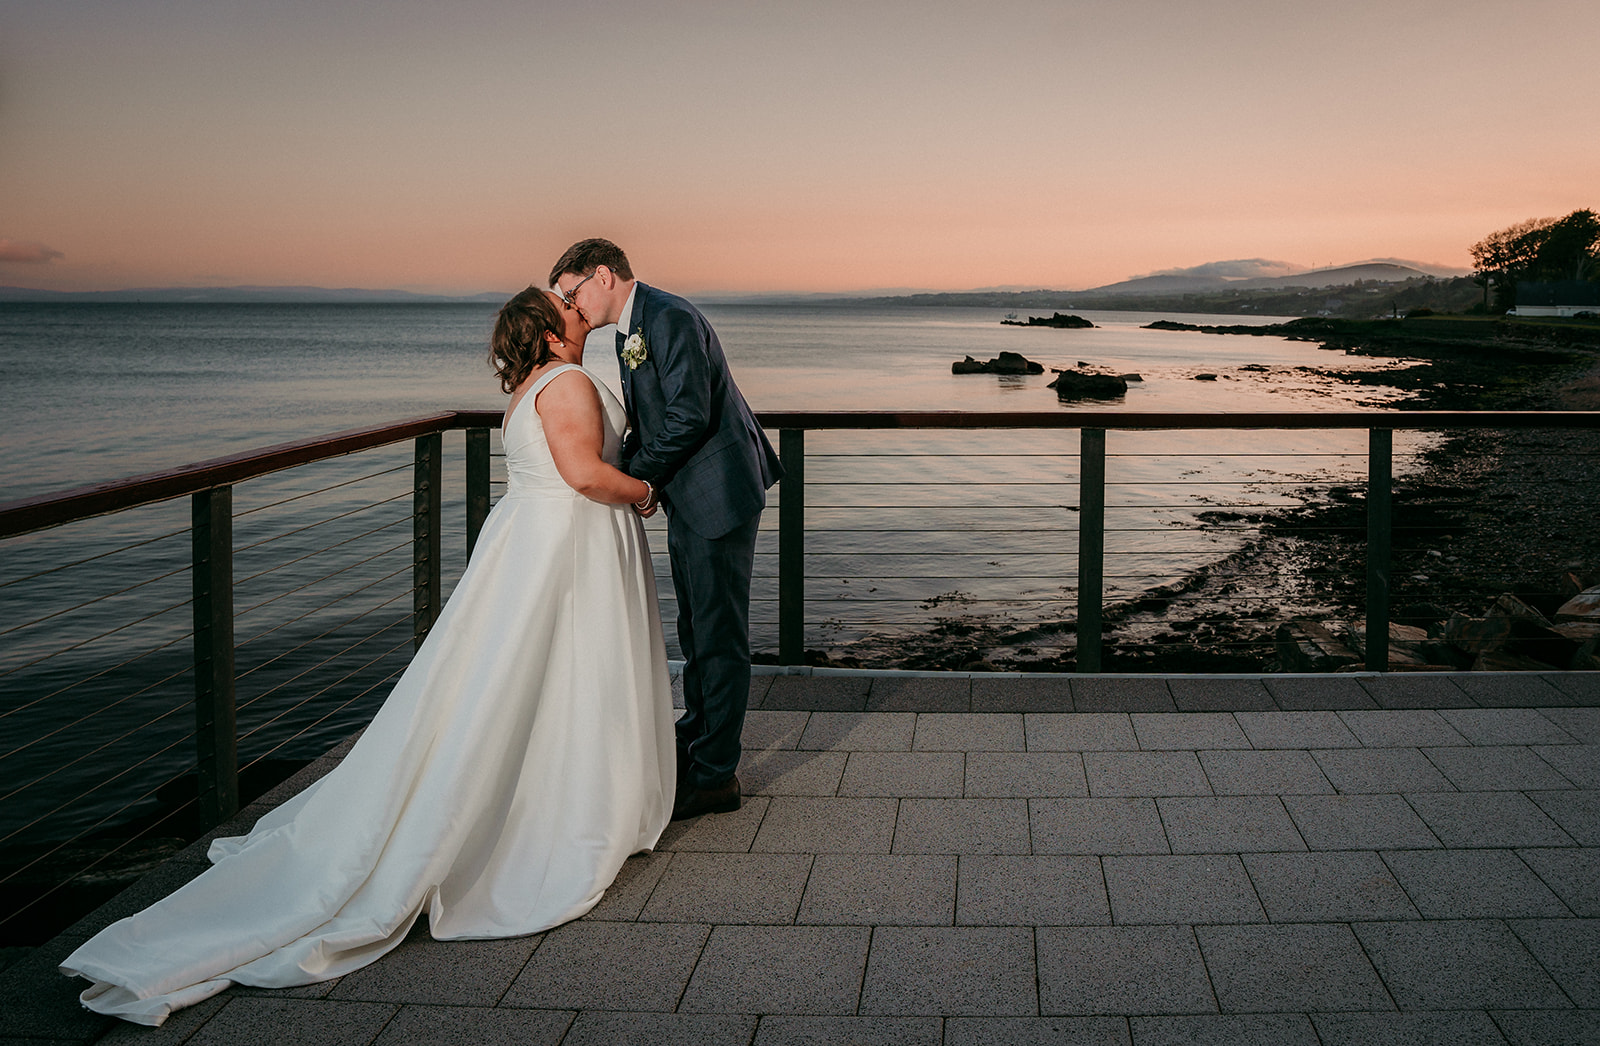 Overlooking the Foyle riverfront at the redcastle hotel in Donegal, Ireland for their dream wedding 